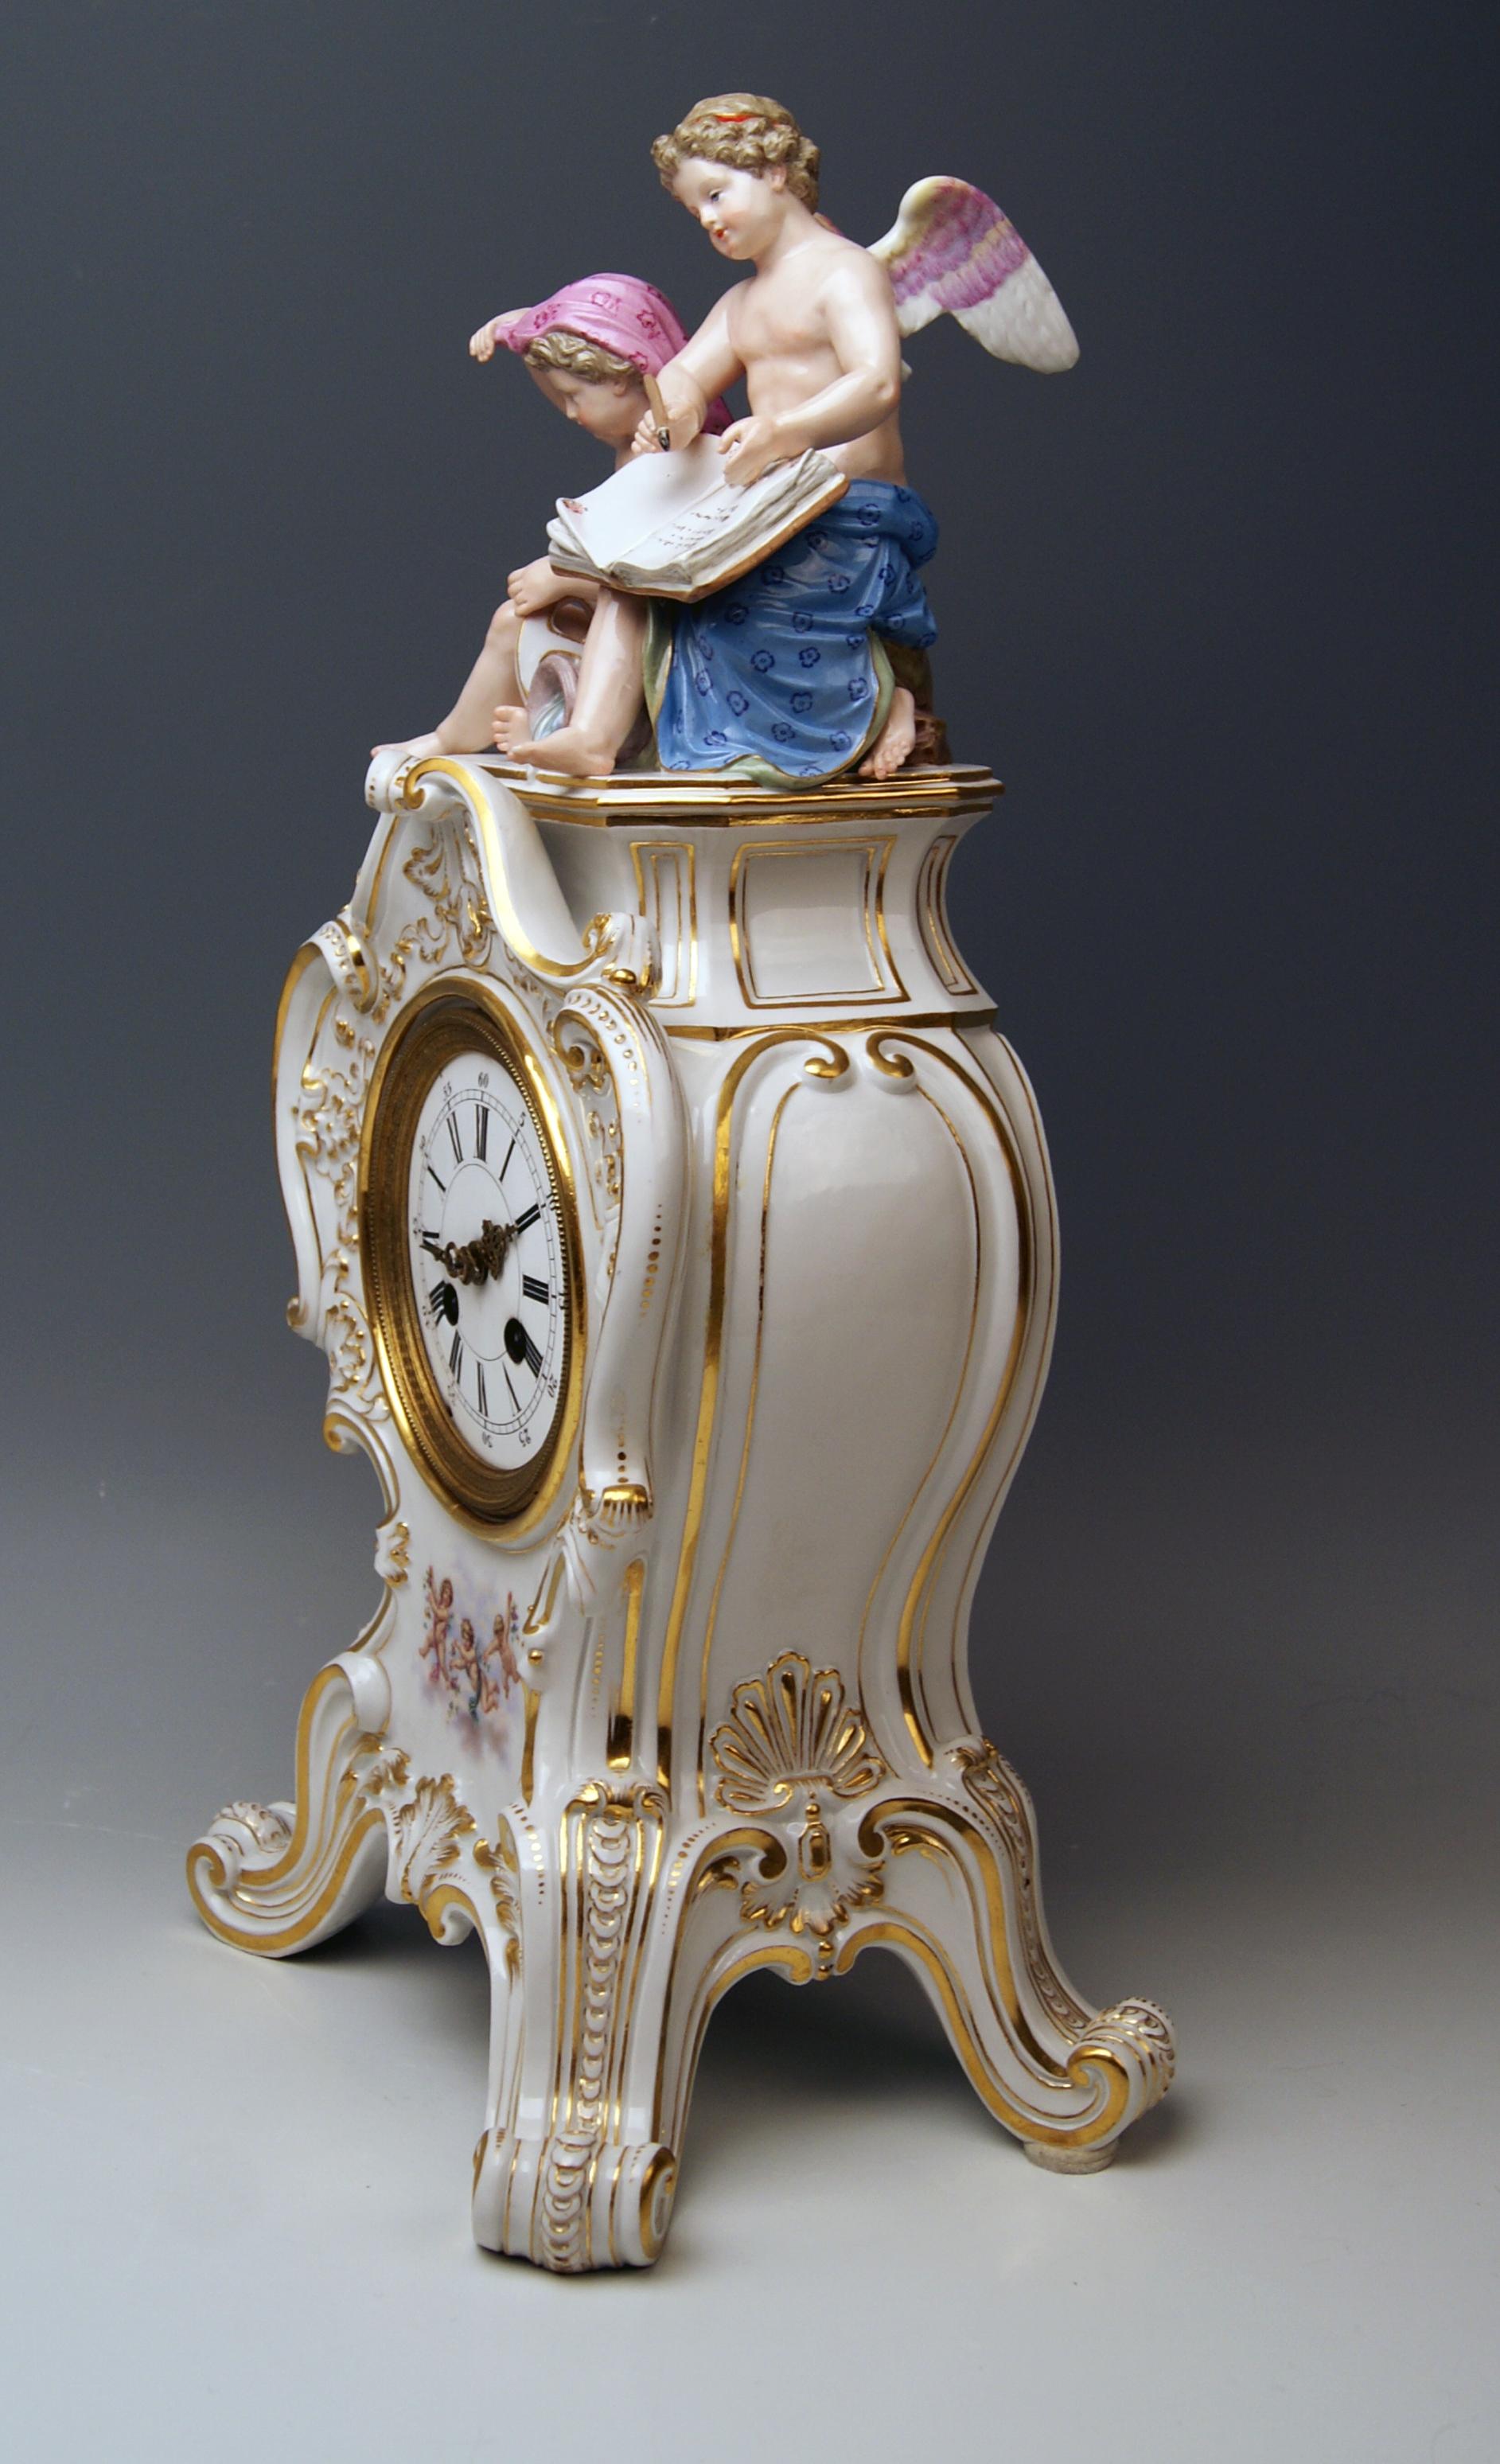 Meissen stunning table clock: Sculptured Figurines  =  Cherubs / Cupids on top piece   (Allegory of Water)
The details are excellently scupltured = finest modelling !

Hallmarked:
Meissen Blue Sword Mark with Pommels on Hilts  (glazed bottom)
Style: